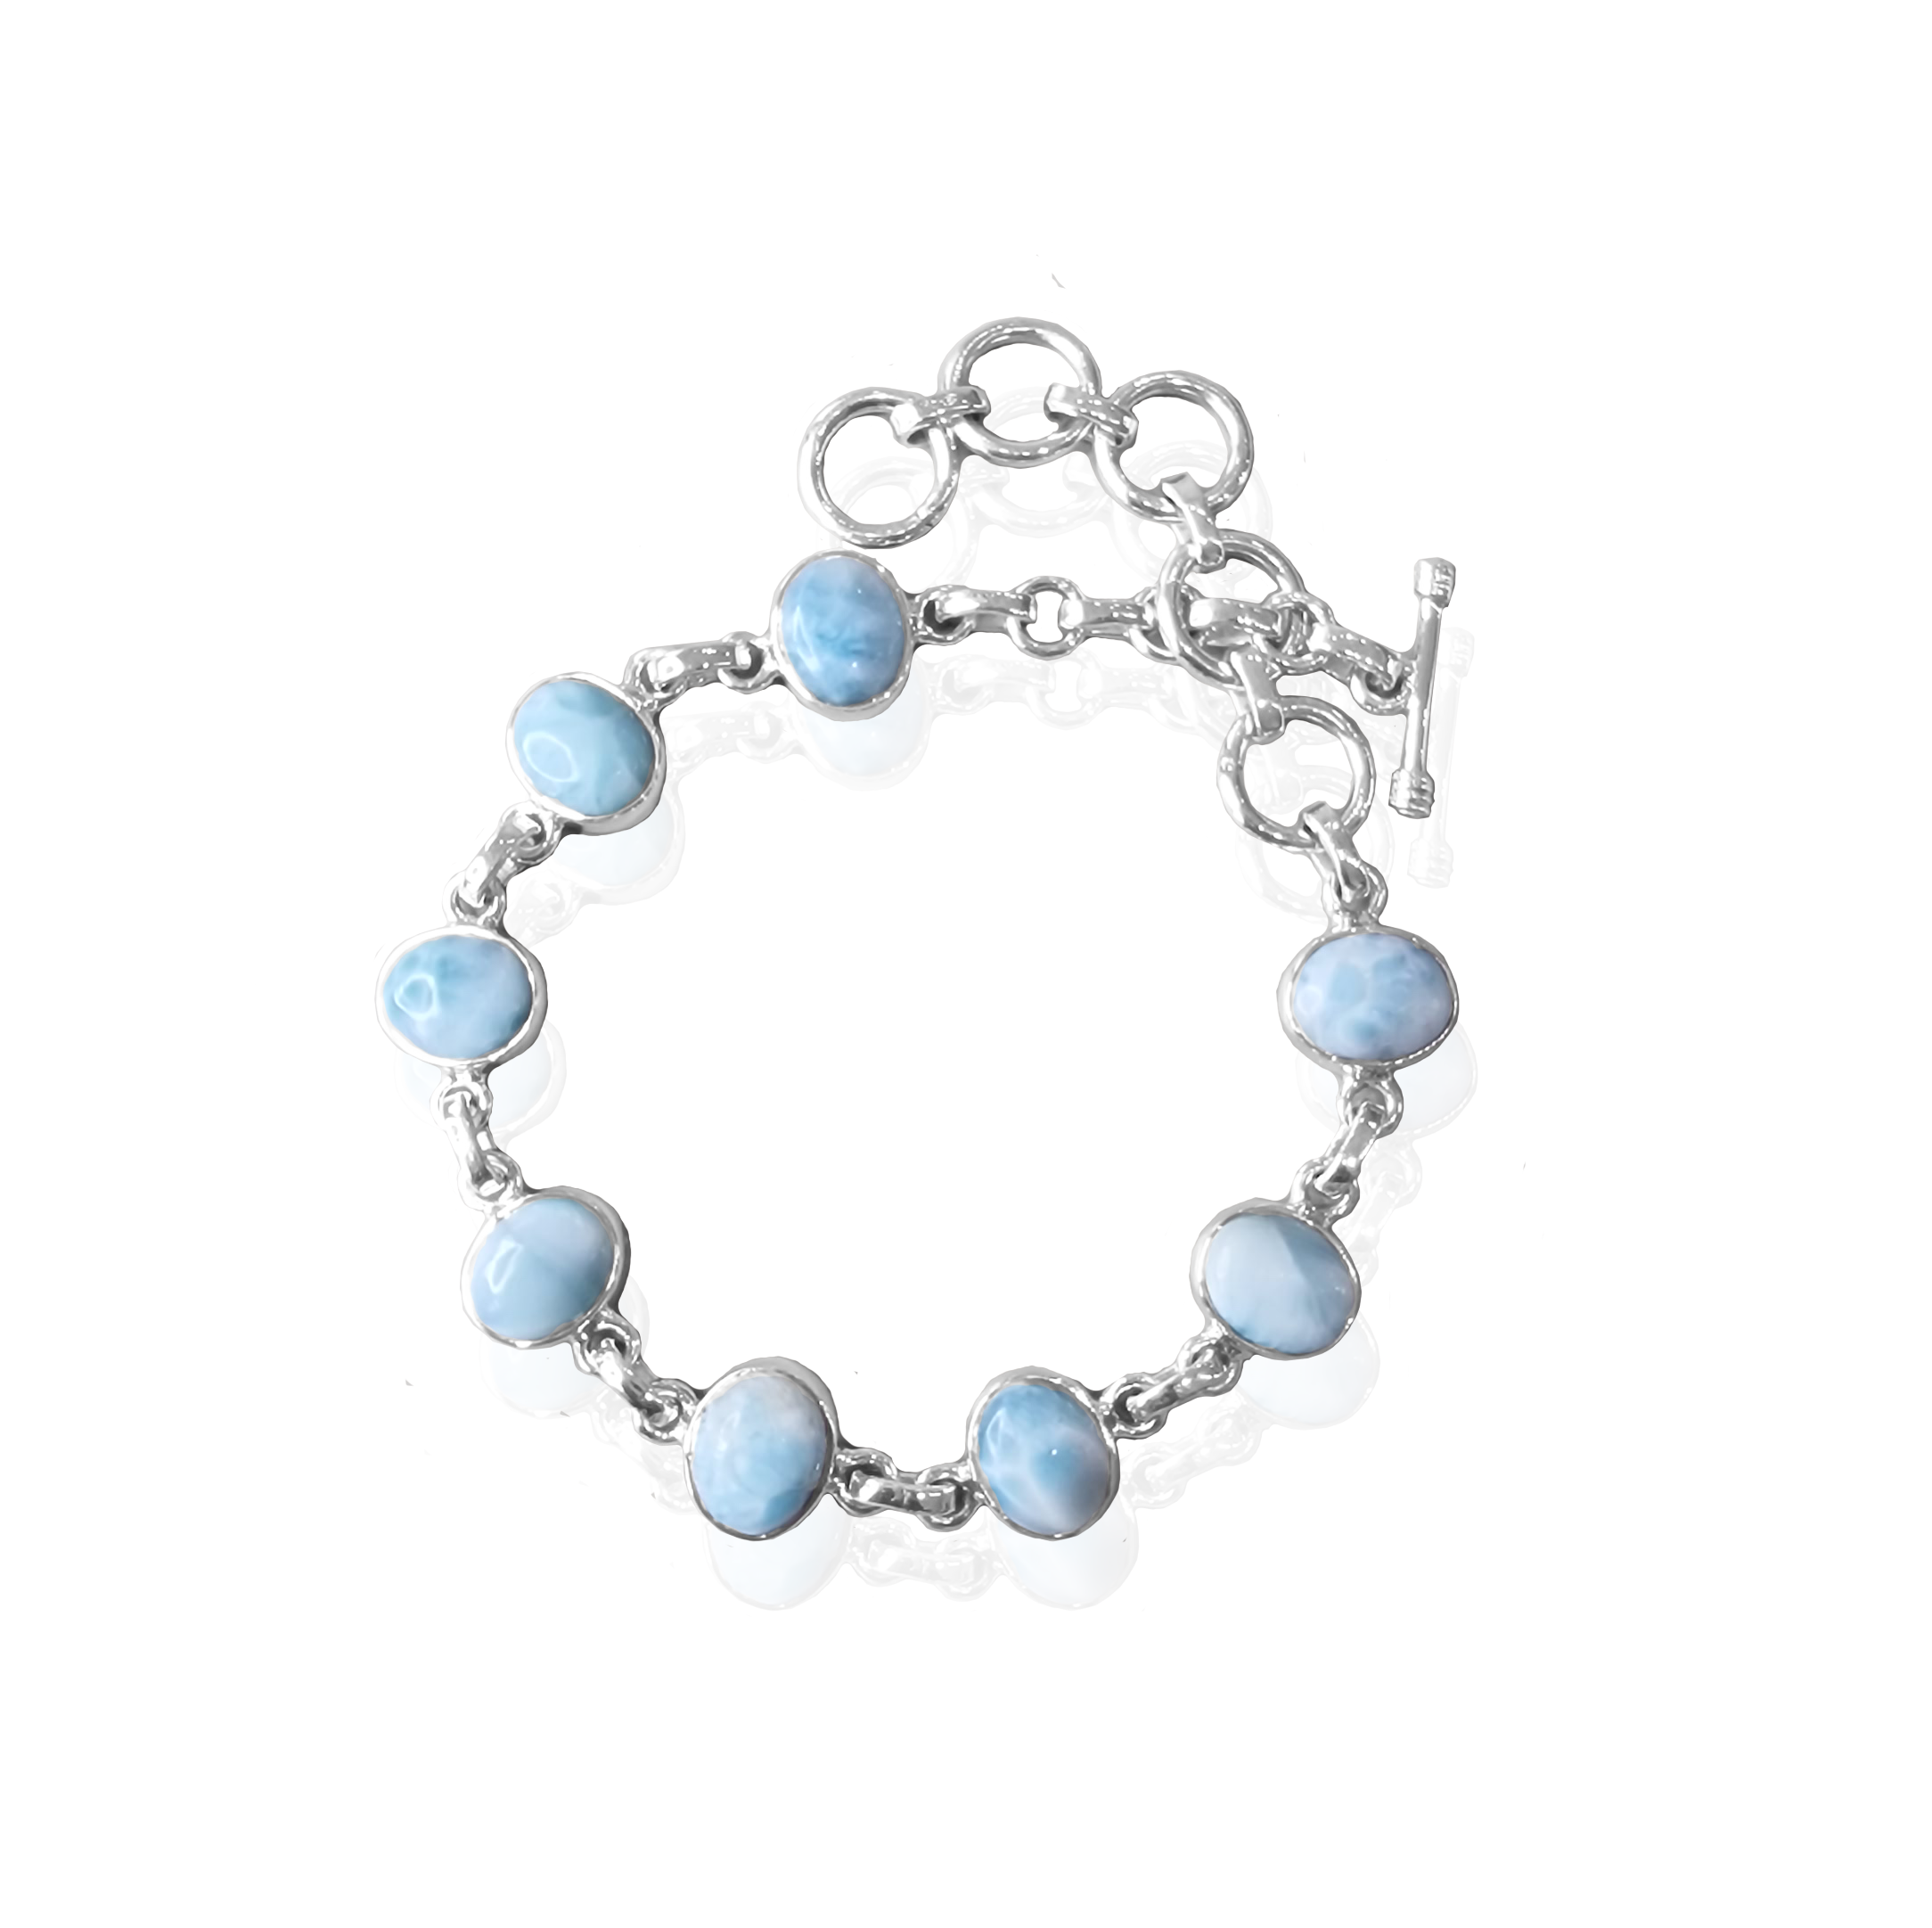 Blue stone bracelet with larimar and spinel by marahlago